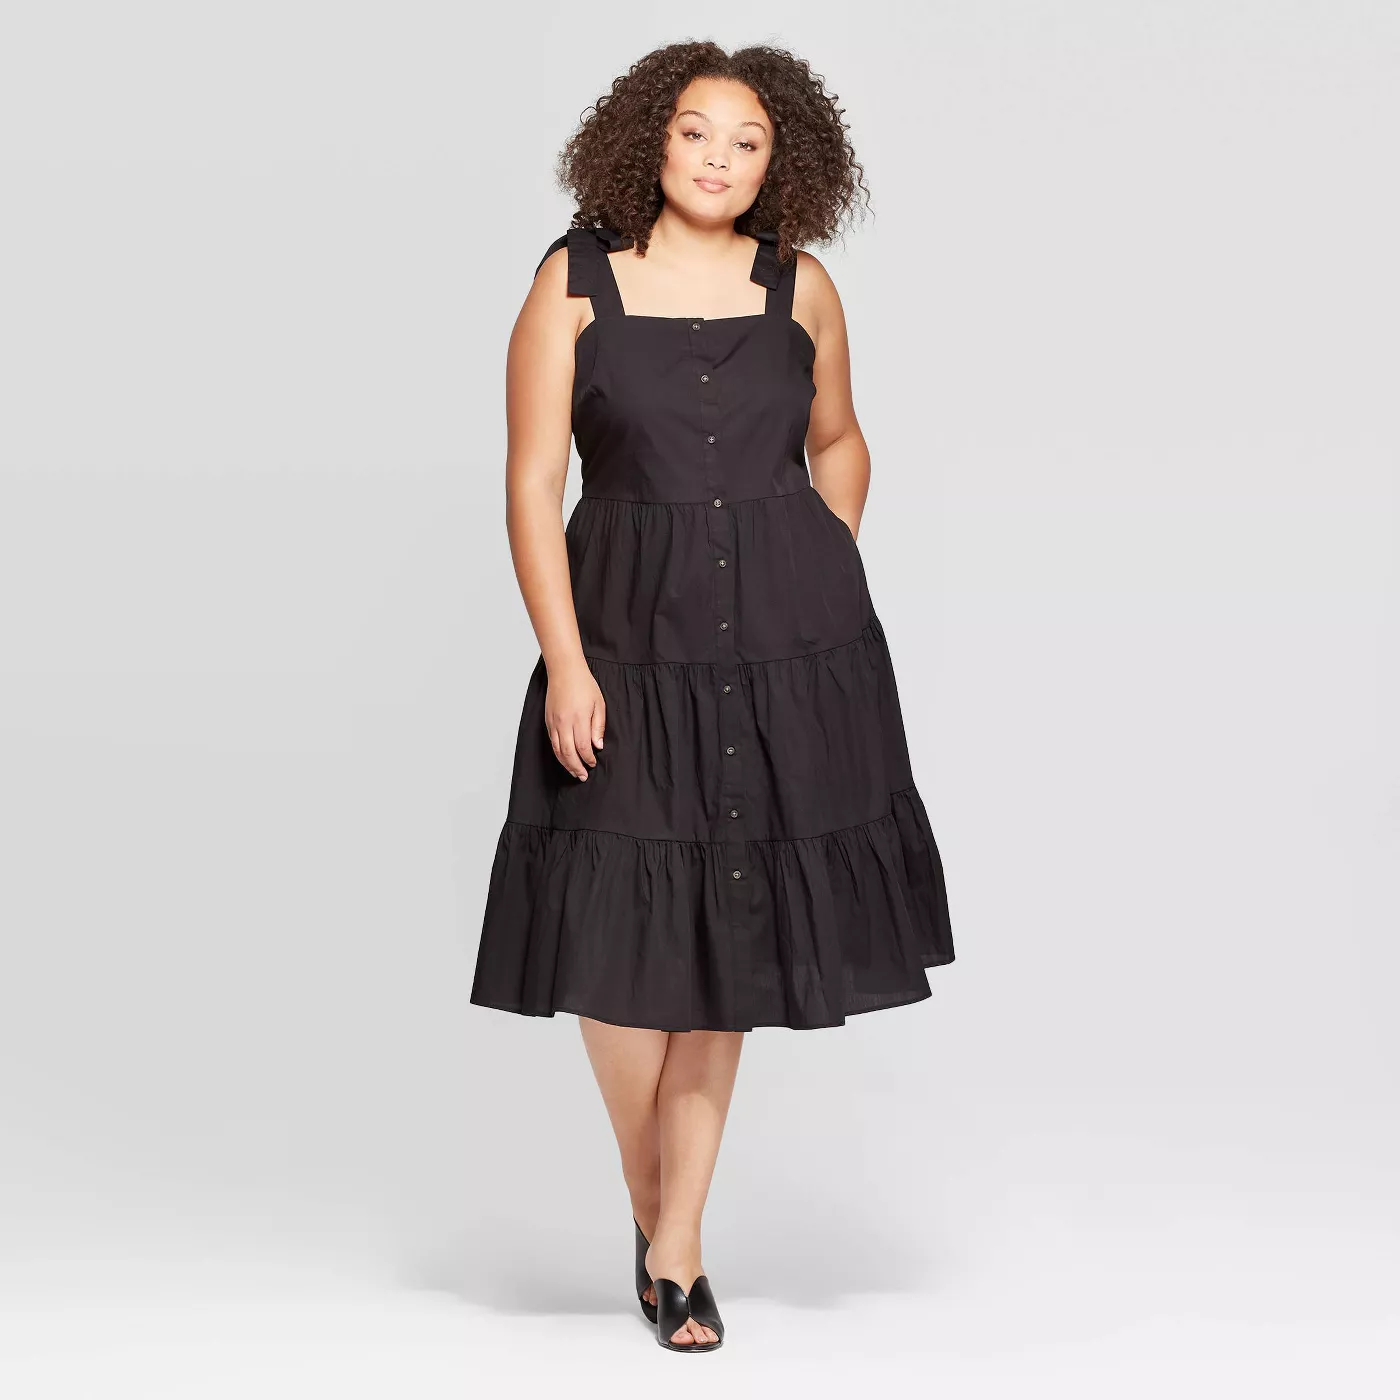 Women's Plus Size Sleeveless Square Neck Tiered Button Front Dress - Who What Wearâ¢ - image 1 of 3